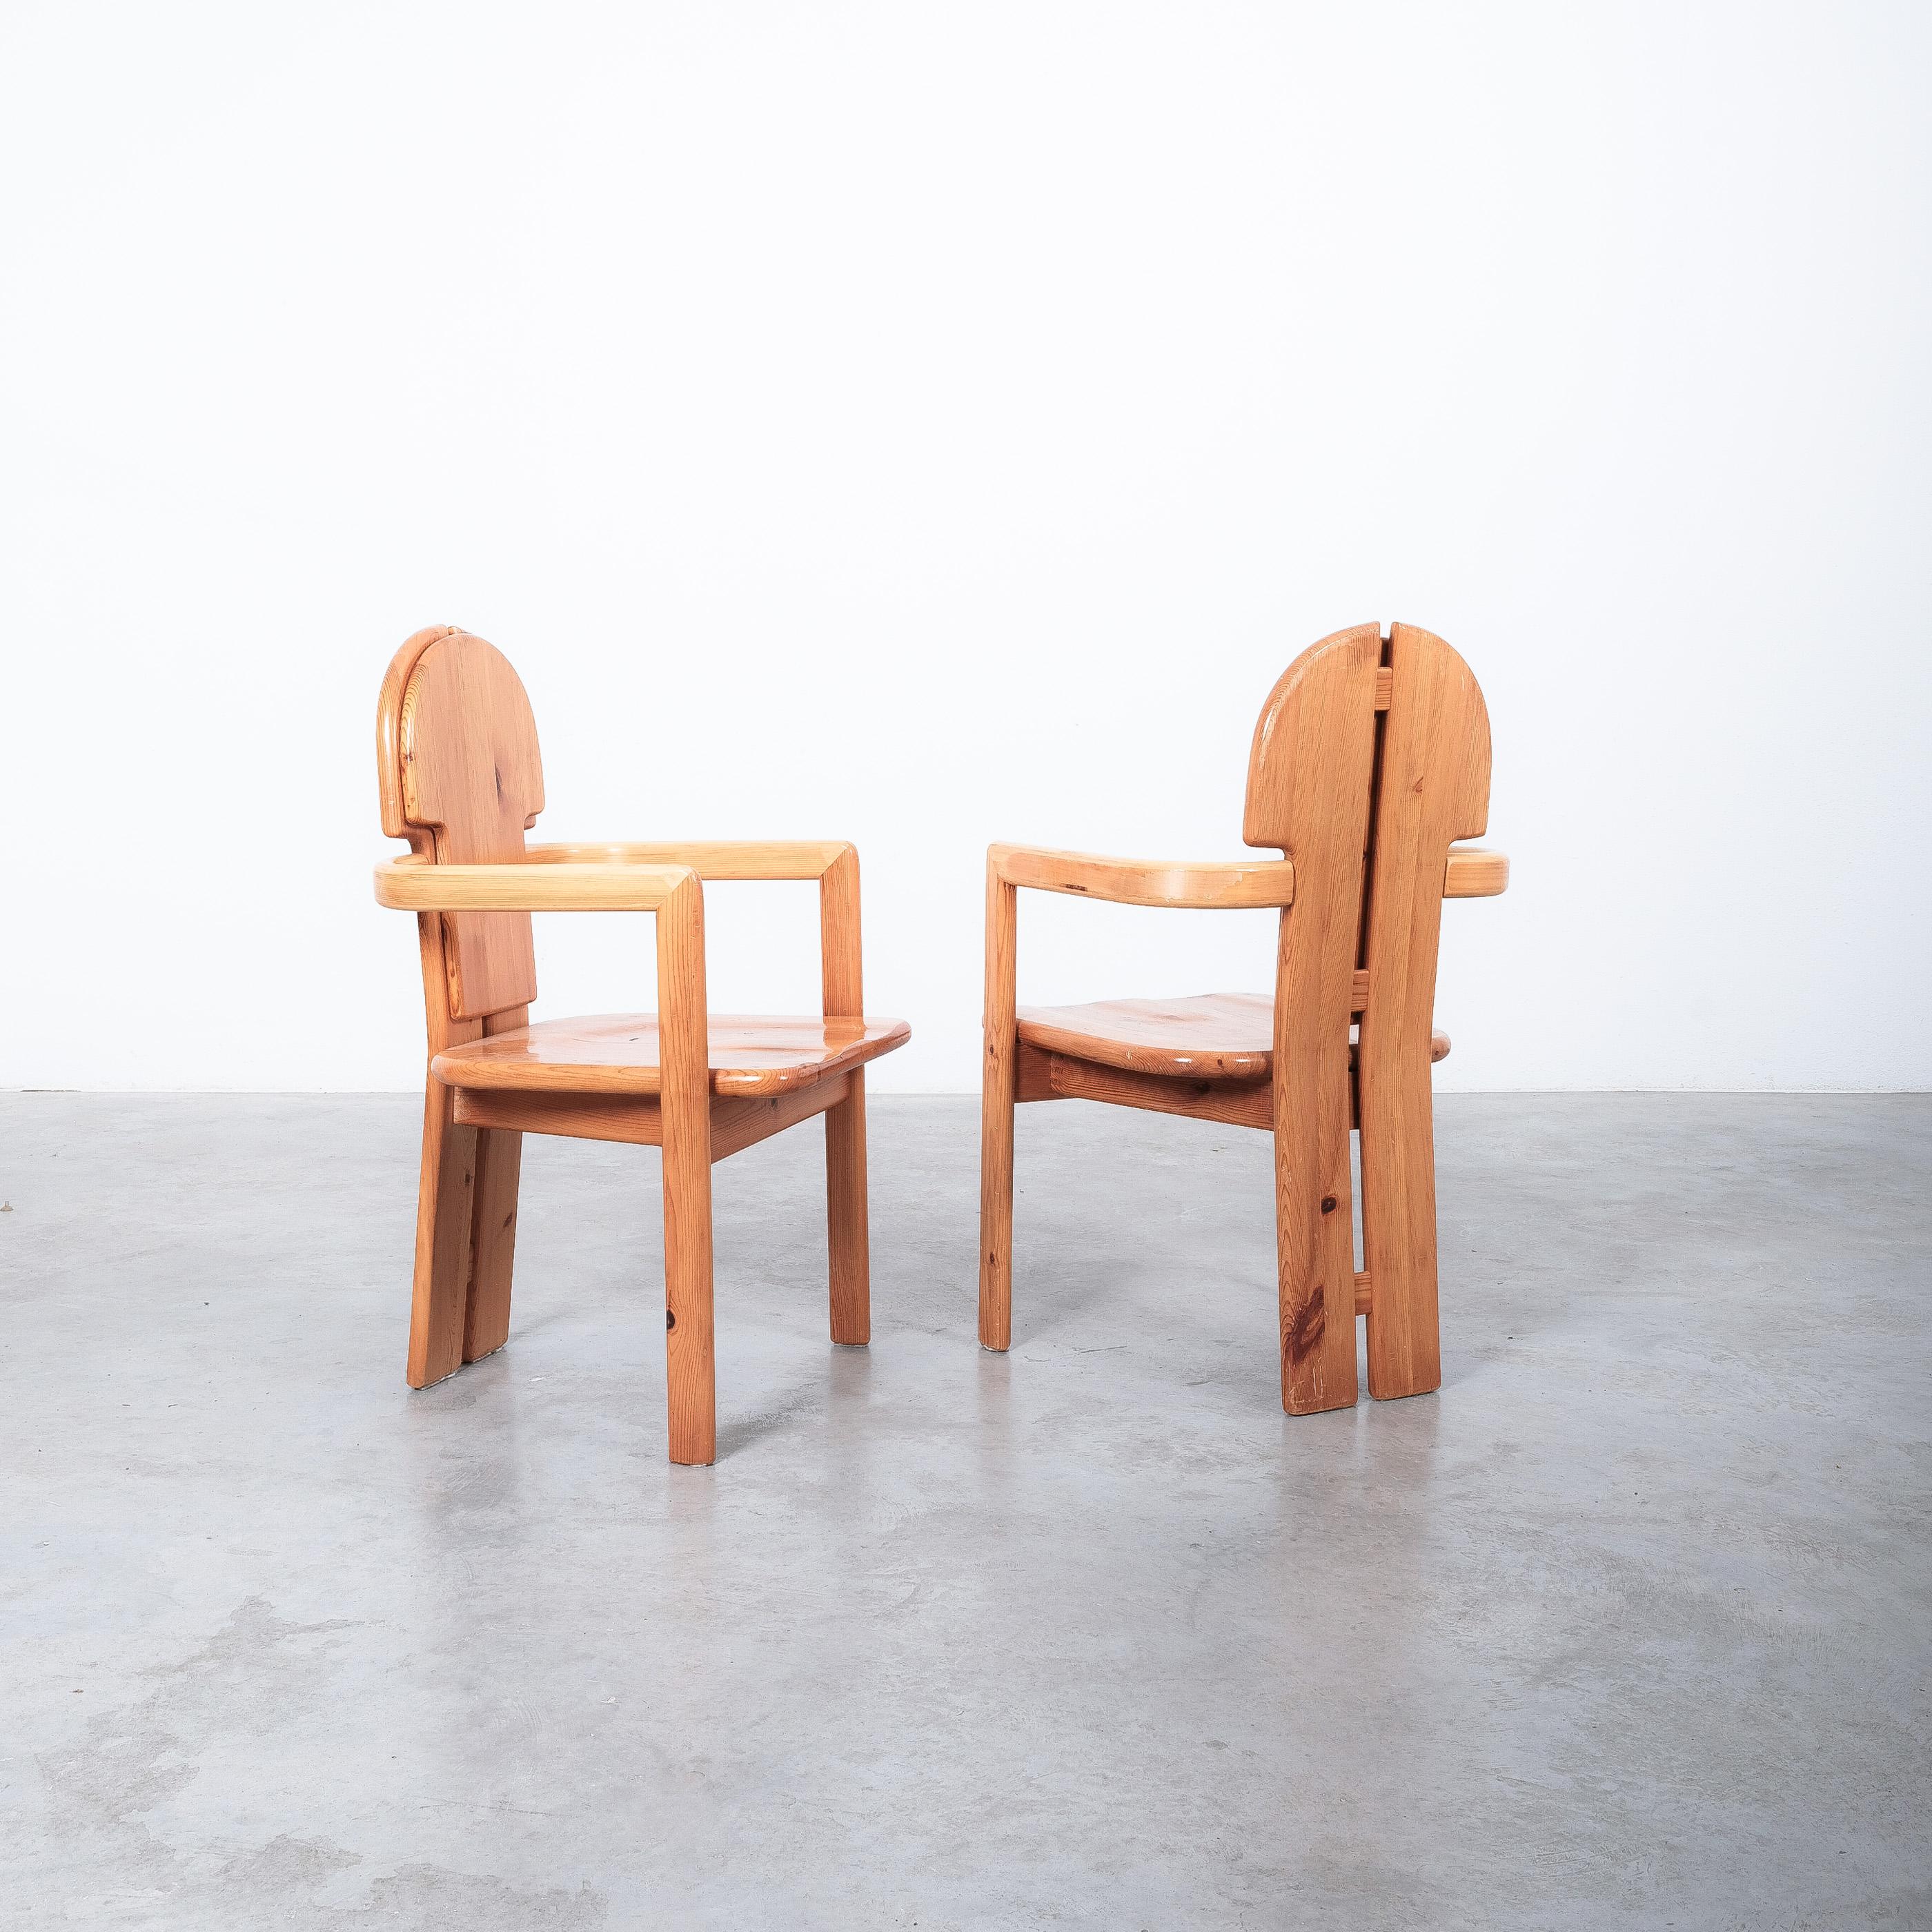 Rainer Daumiller Solid Pine Wood Dining Chairs '6' Danish Design, 1970 For Sale 8